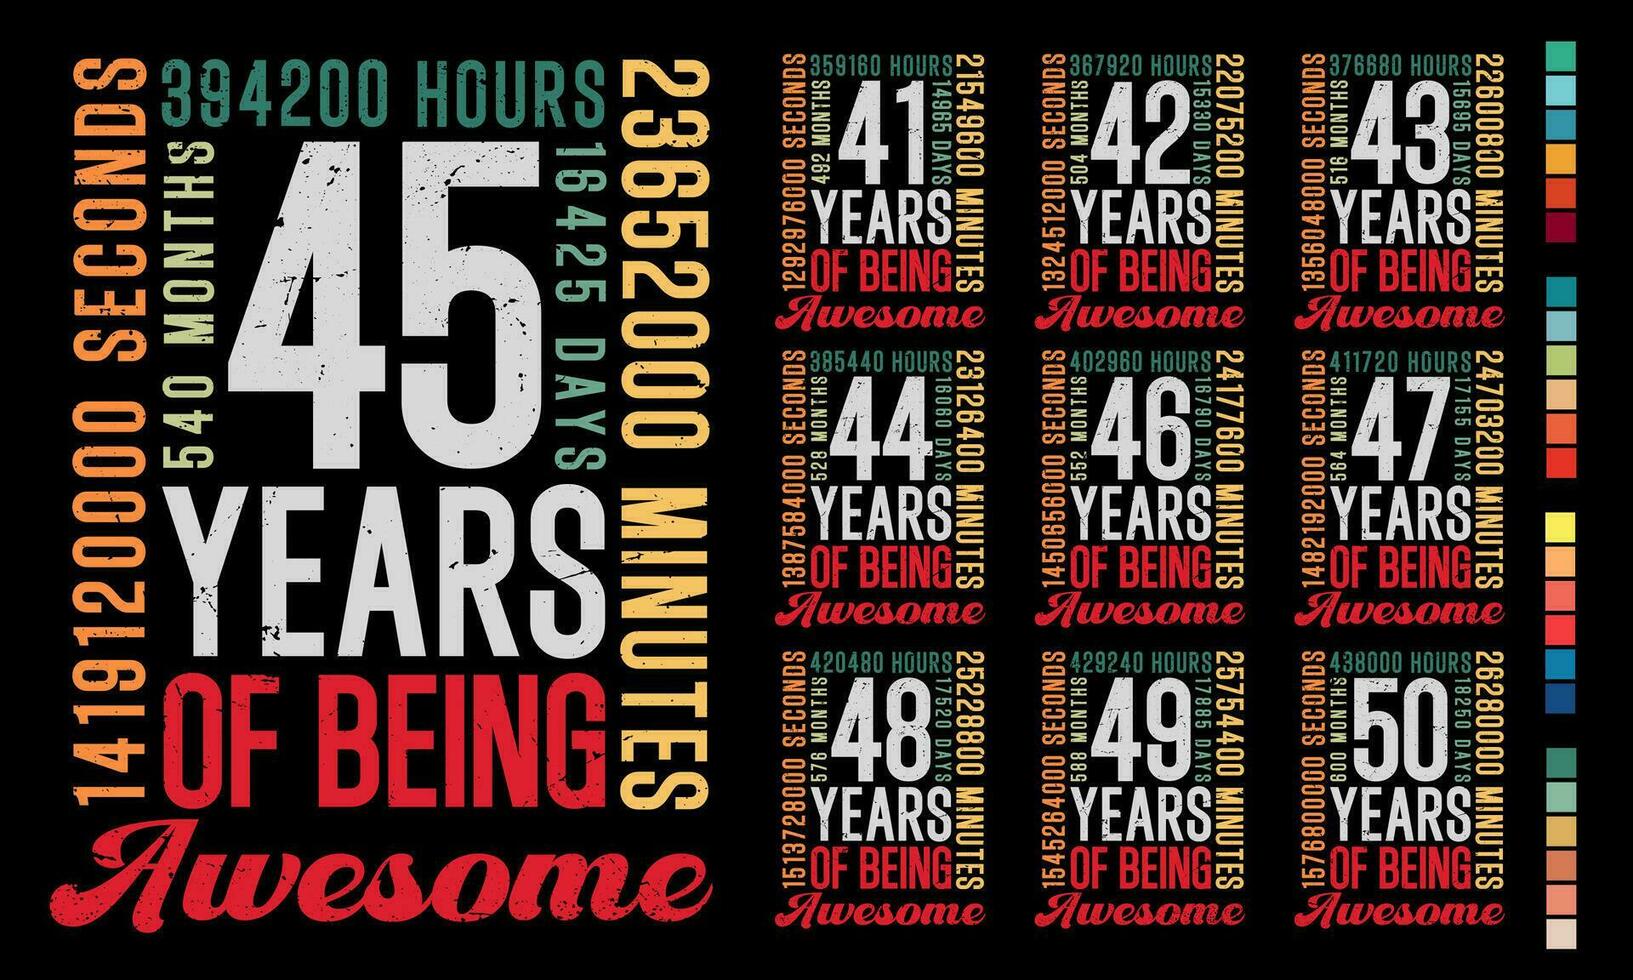 Adults Birthday Gen X 41-50 Years Old Months Old of Being Awesome Vintage Retro vector